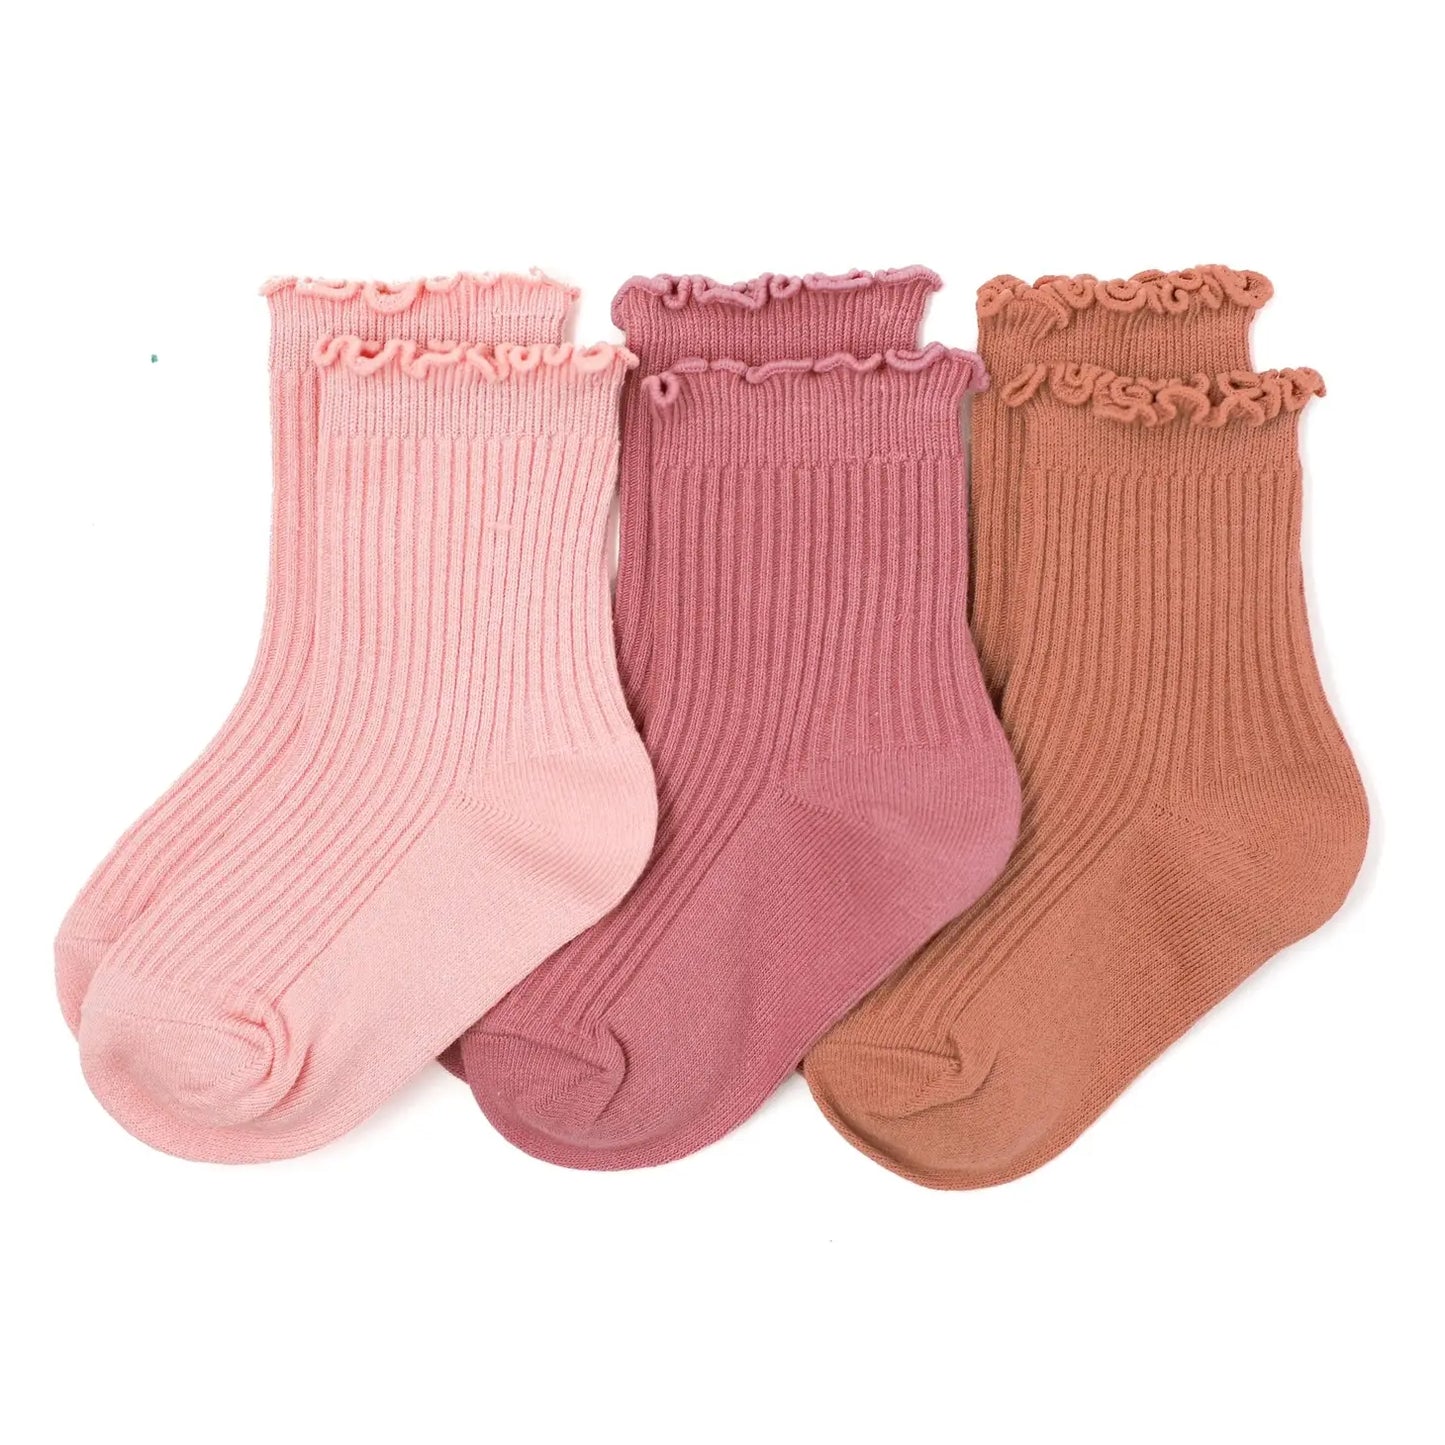 Sedona Lettuce Trim Midi 3-Pack includes 1 pair each of Antique pink, Marmalade, and Peach. Midi socks are made to hit in between the ankle and lower calf.   Machine wash cold with like colors.  tumble dry low or lay flat to dry.  79% cotton, 19% polyester, 2% spandex.  Women Owned.